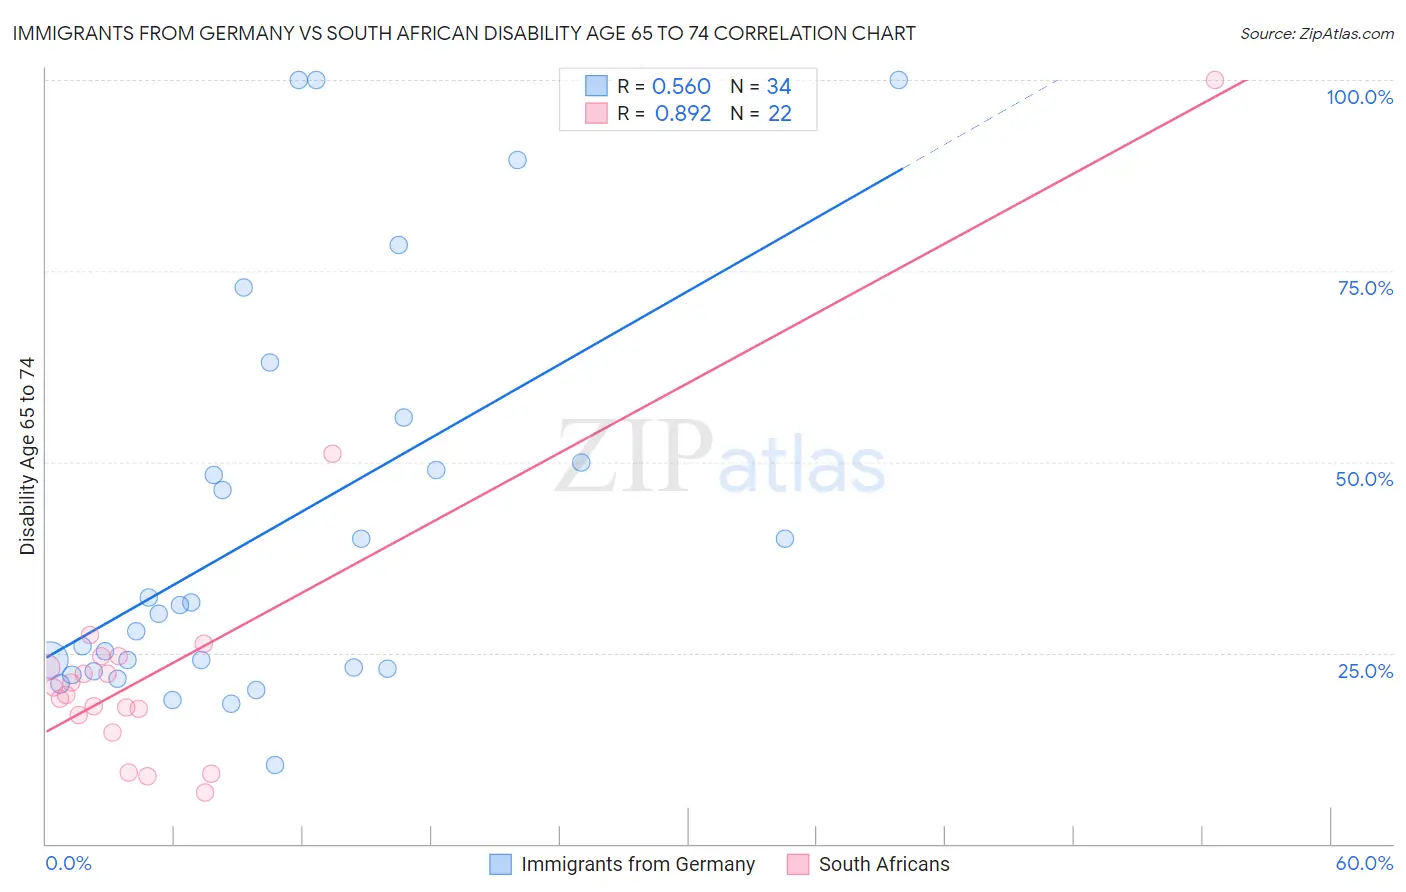 Immigrants from Germany vs South African Disability Age 65 to 74